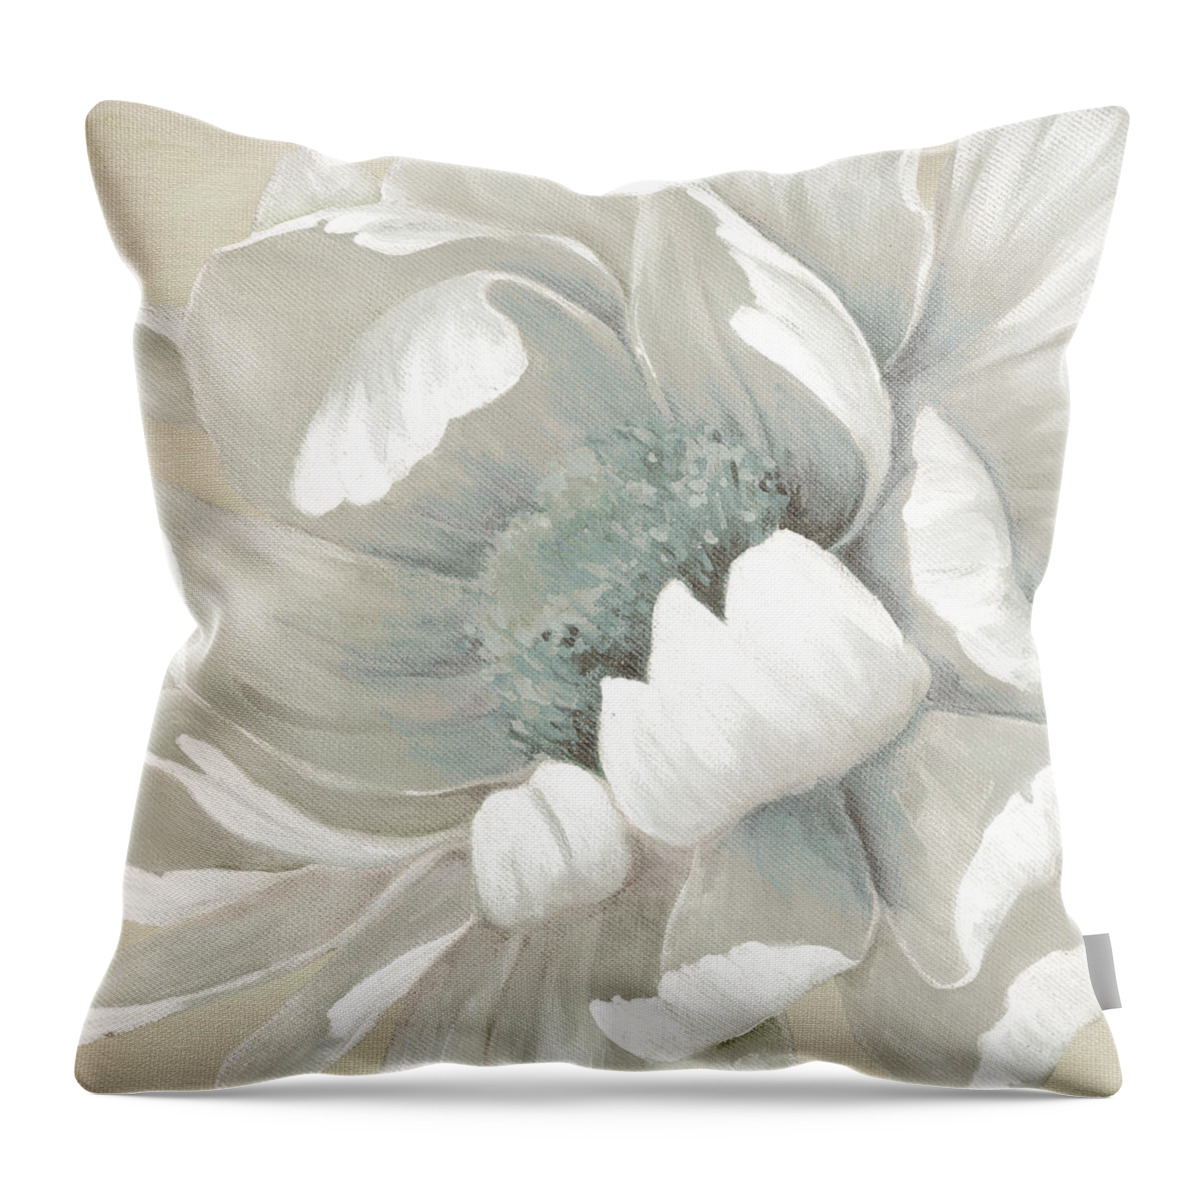 White Peony Throw Pillow featuring the painting Winter Bloom 1 by Carol Robinson